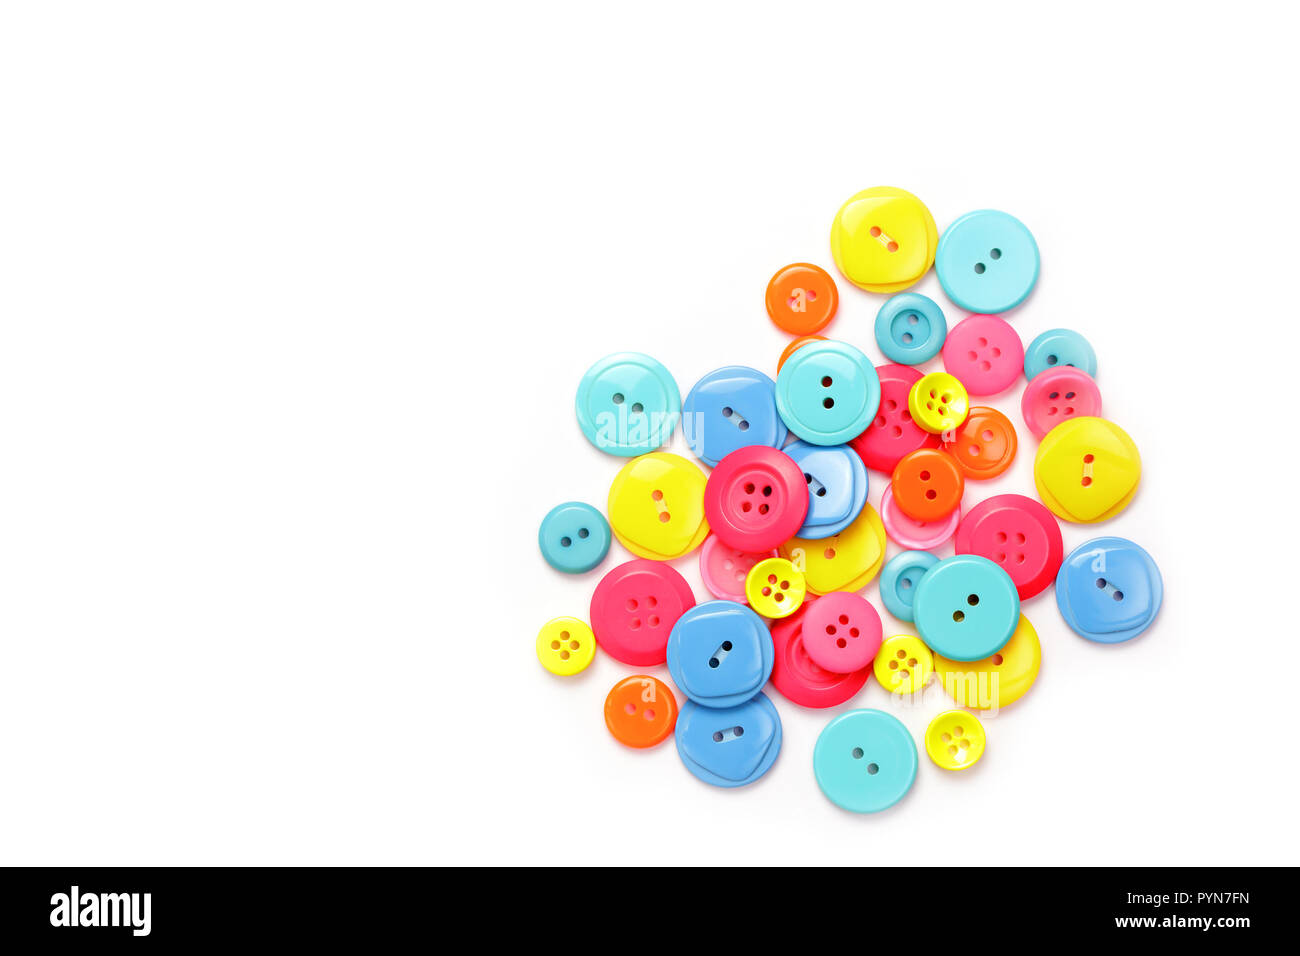 Colorful buttons stacked together on a white background Stock Photo